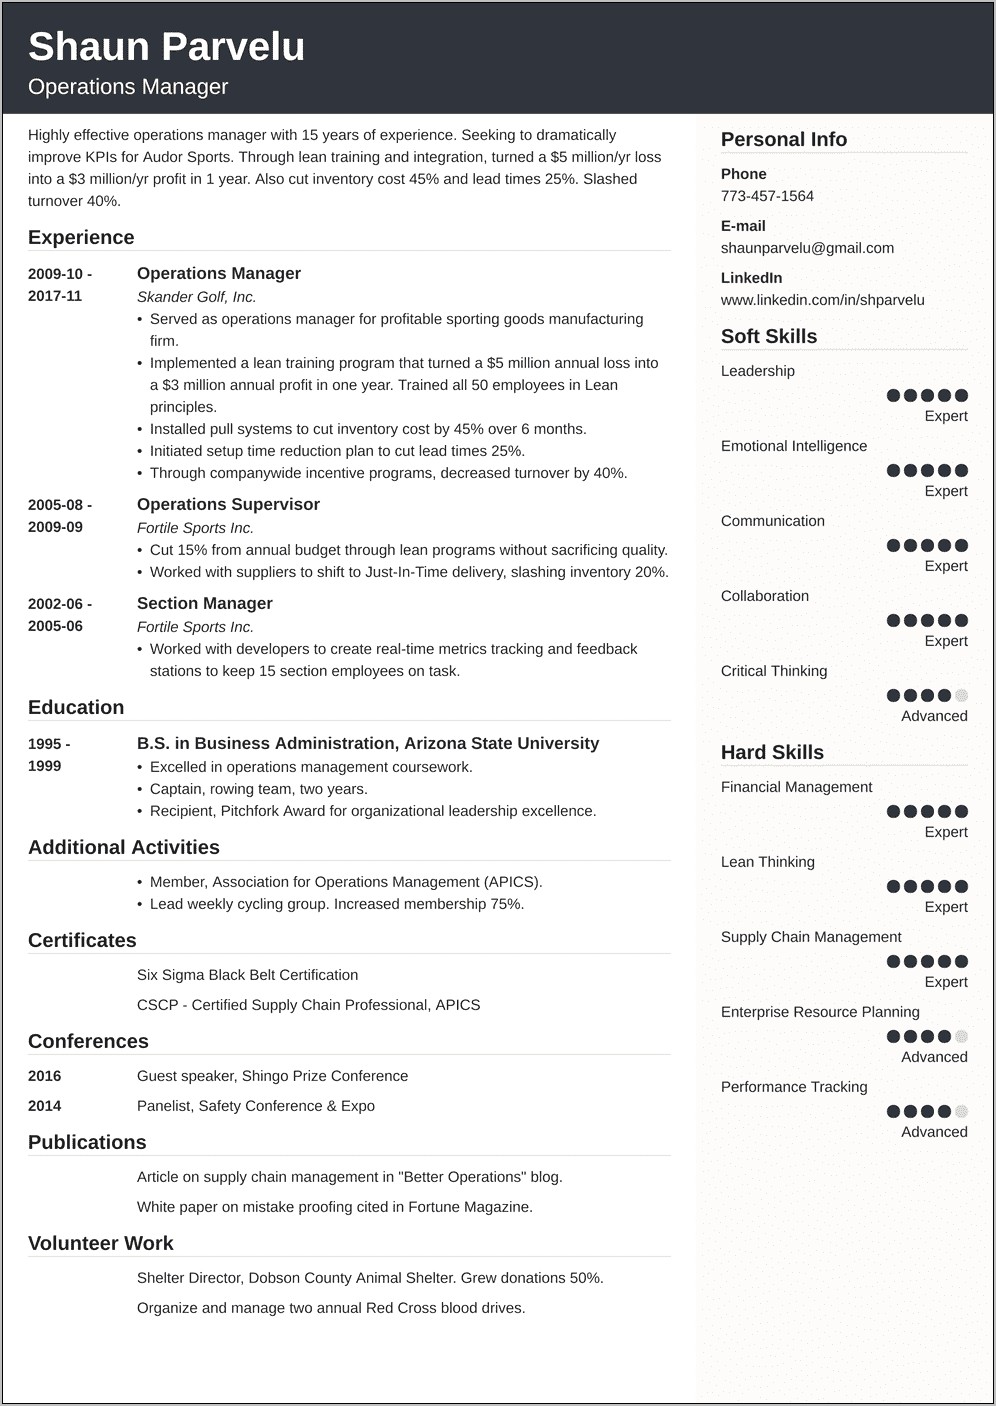 Skills For Operations Manager Resume